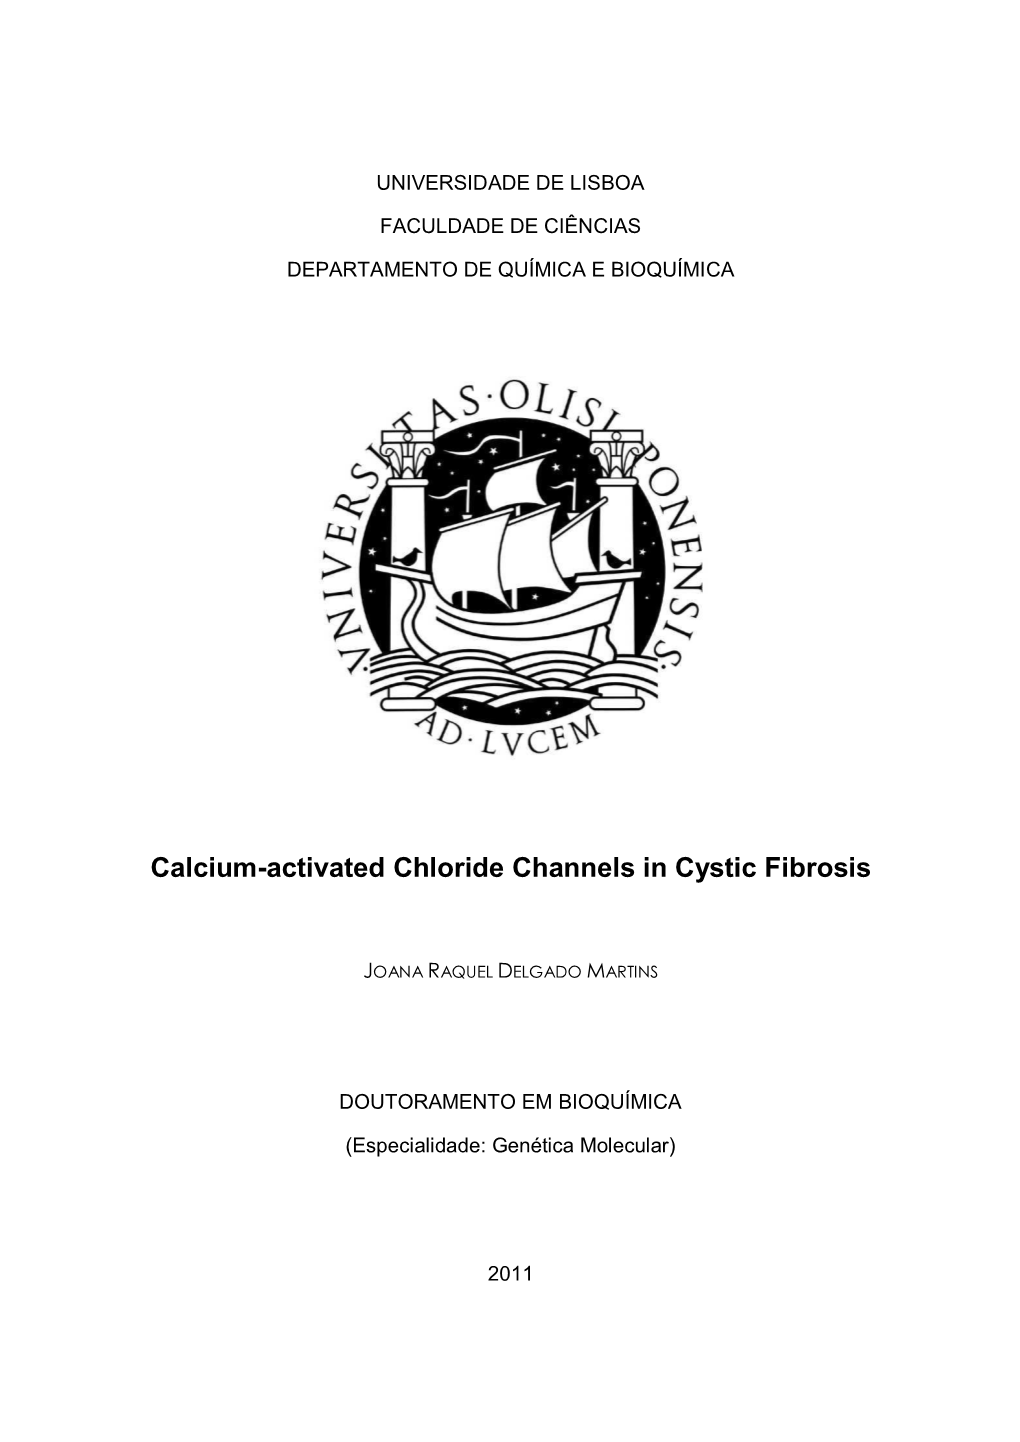 Calcium-Activated Chloride Channels in Cystic Fibrosis